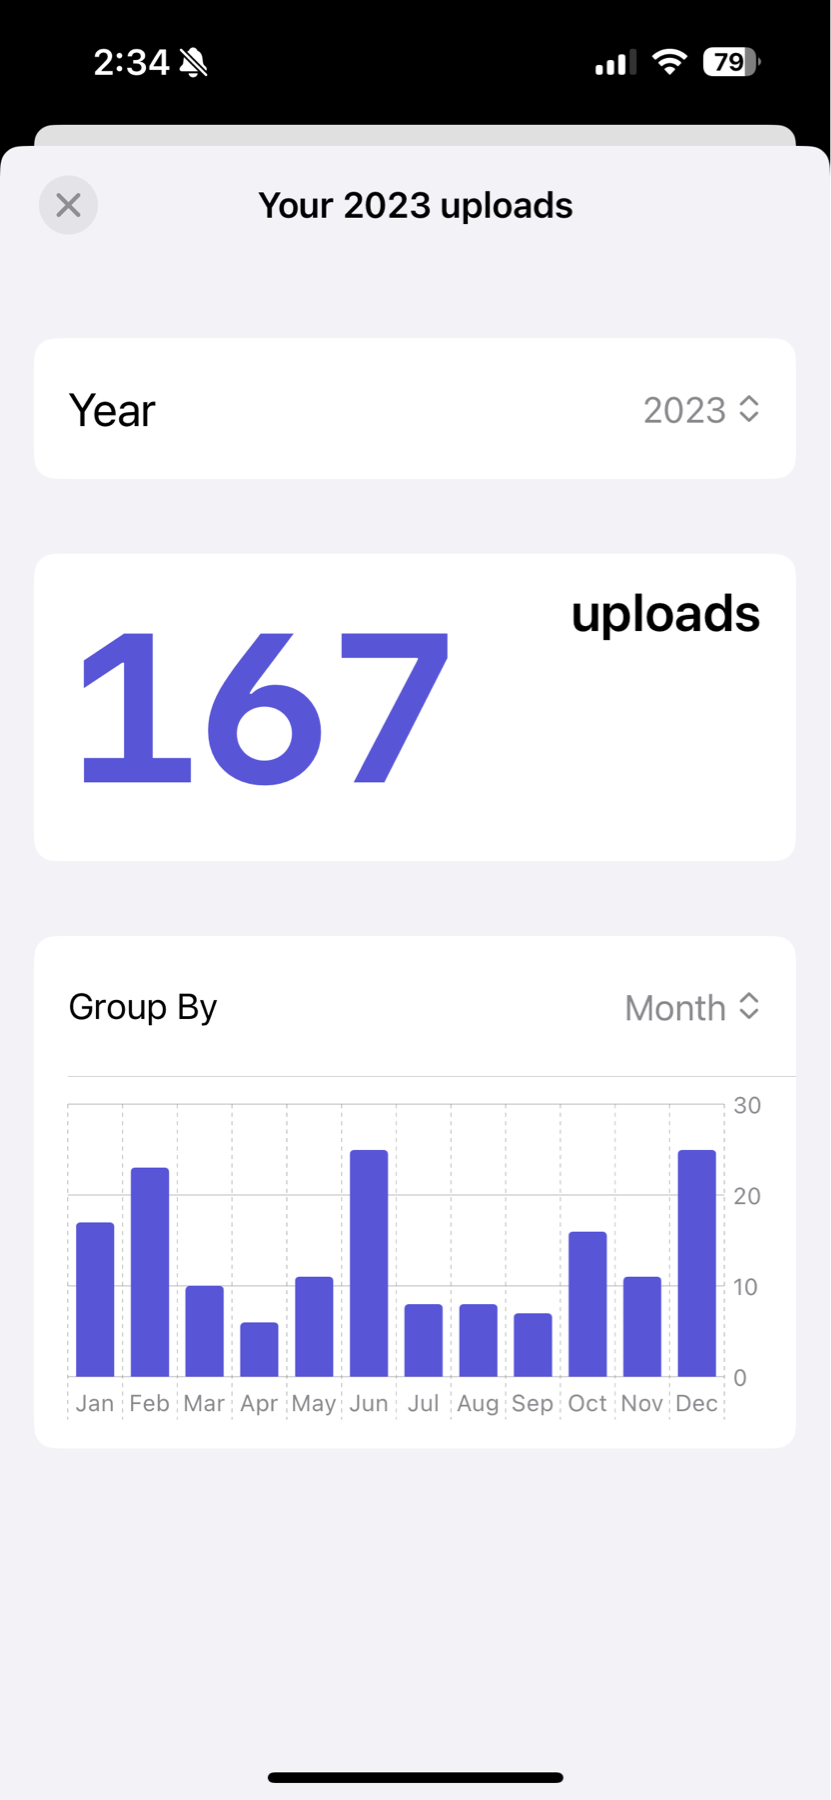 Screenshot of a mobile phone displaying a user’s file uploads for the year 2023, with a total count of 167 uploads. Below the count, a bar chart breaks down the number of uploads by month, with varying heights representing different quantities per month.